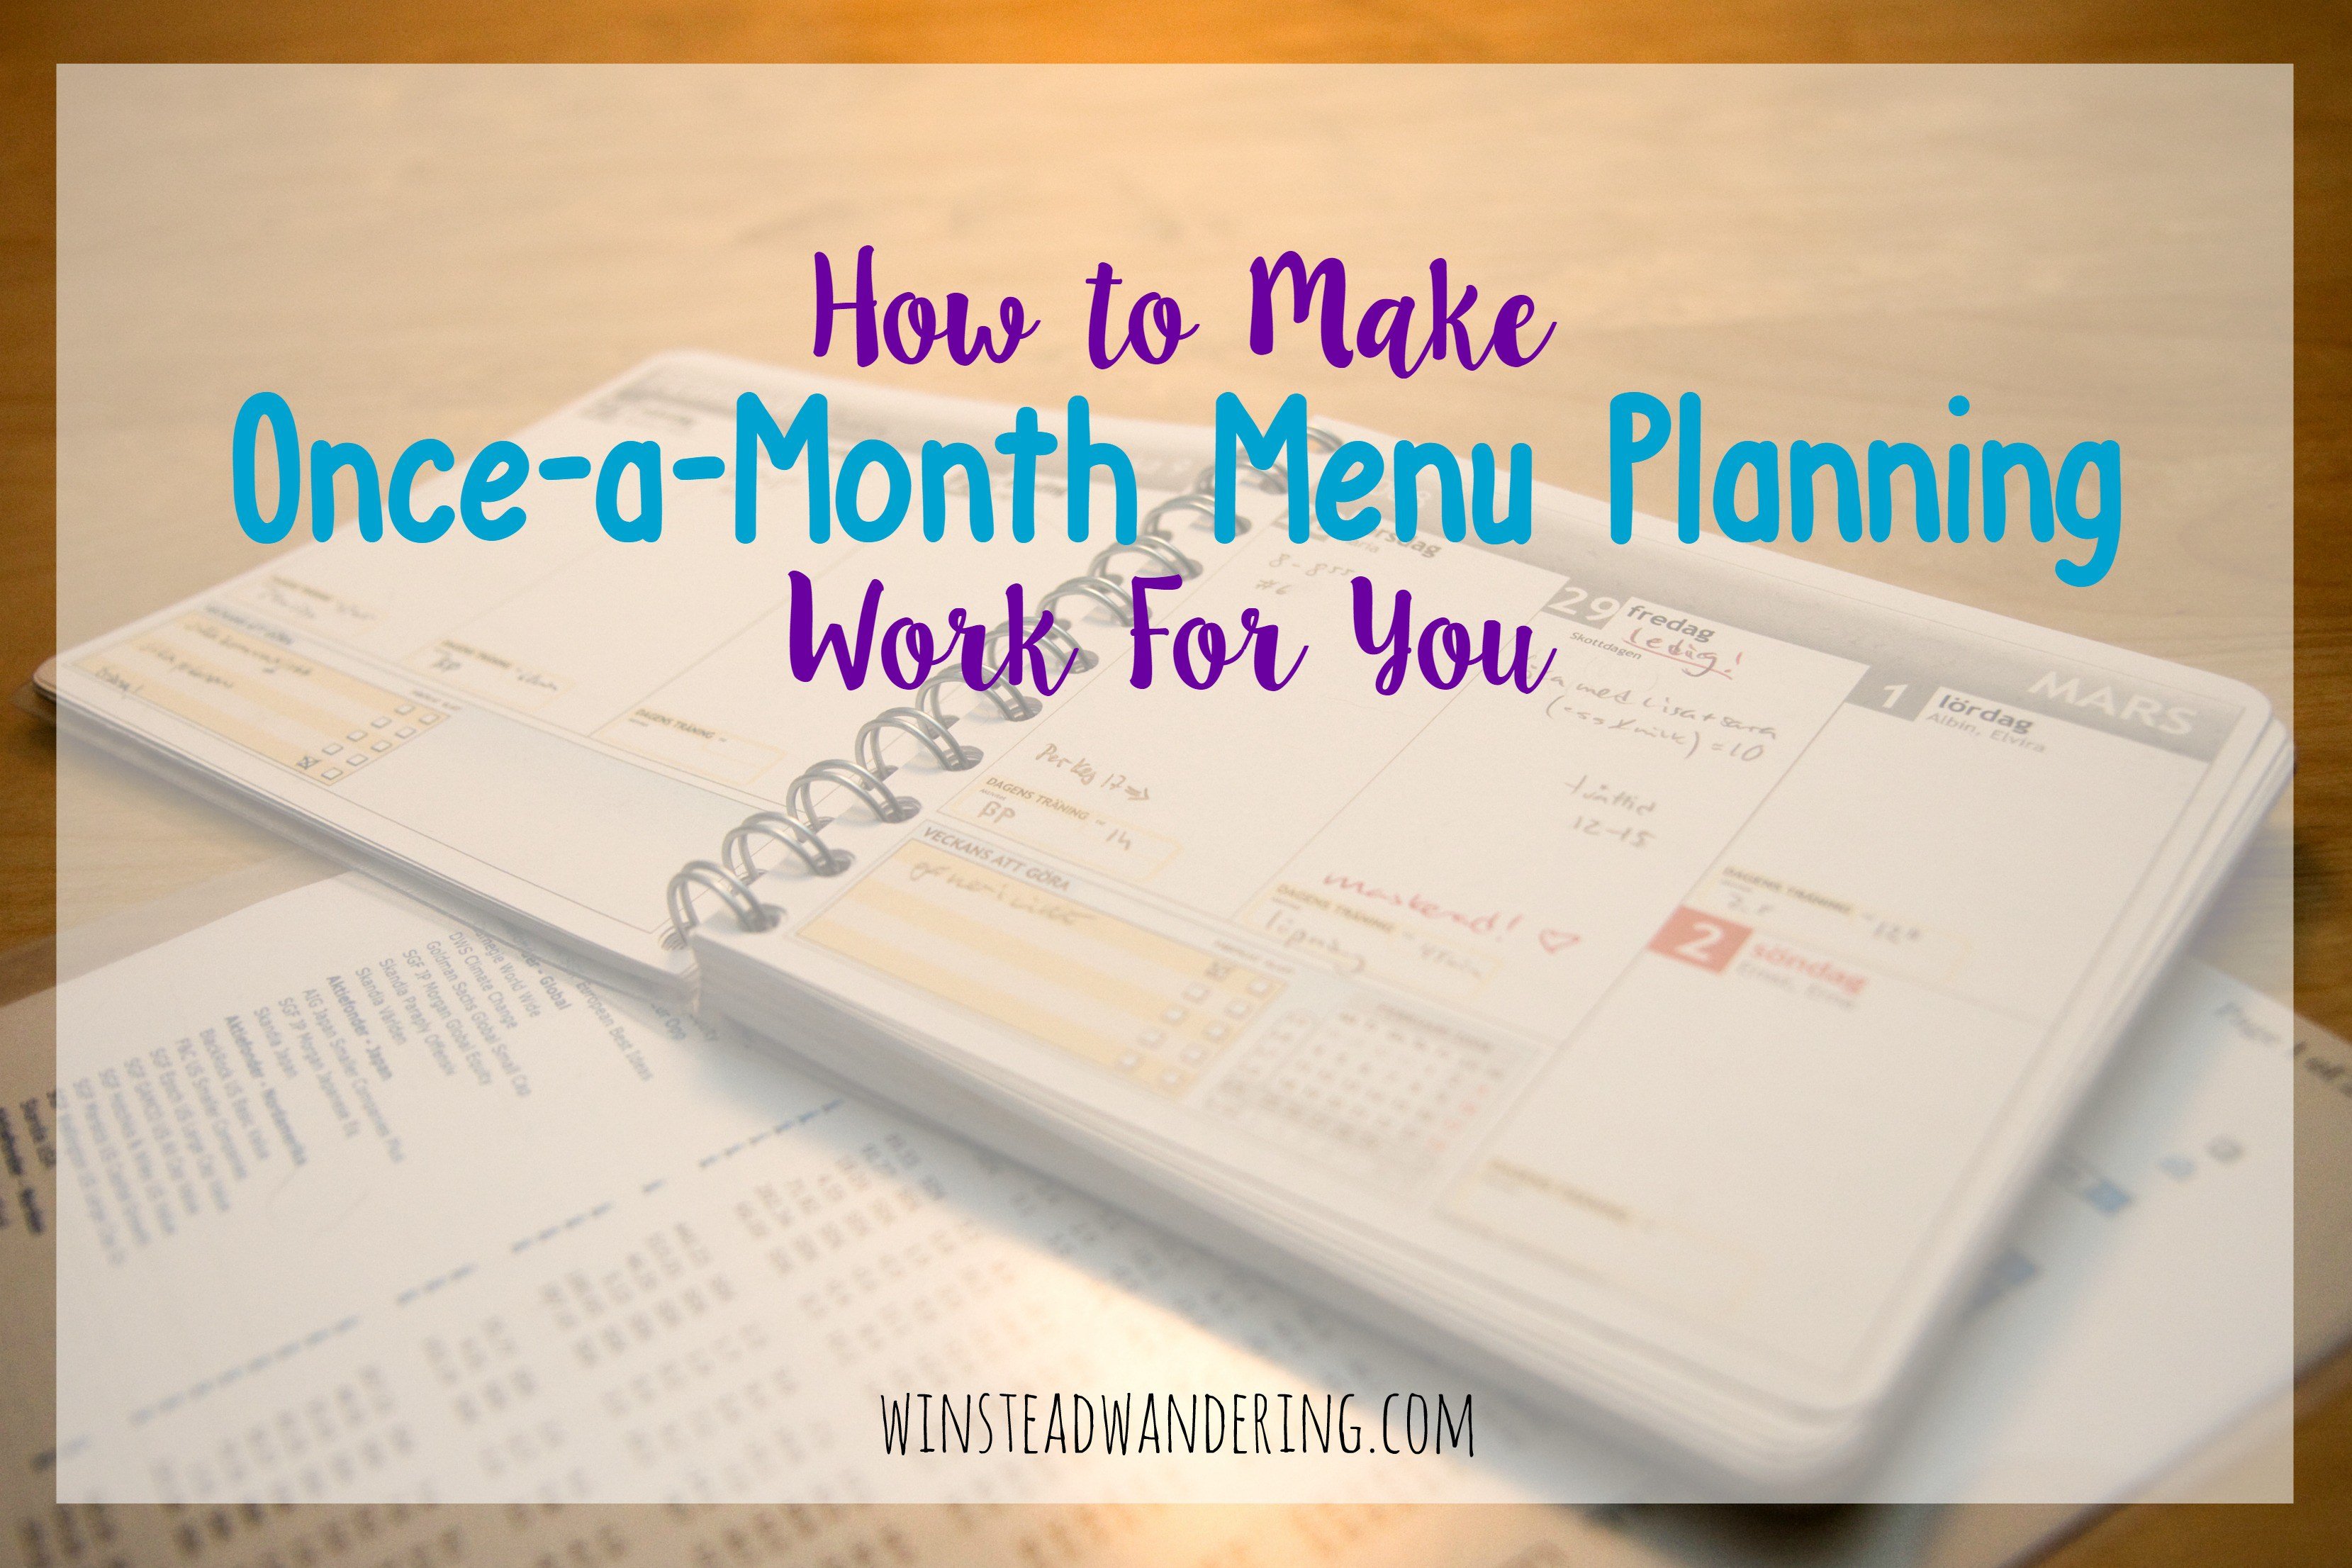 How to Make Once-a-Month Menu Planning Work for You